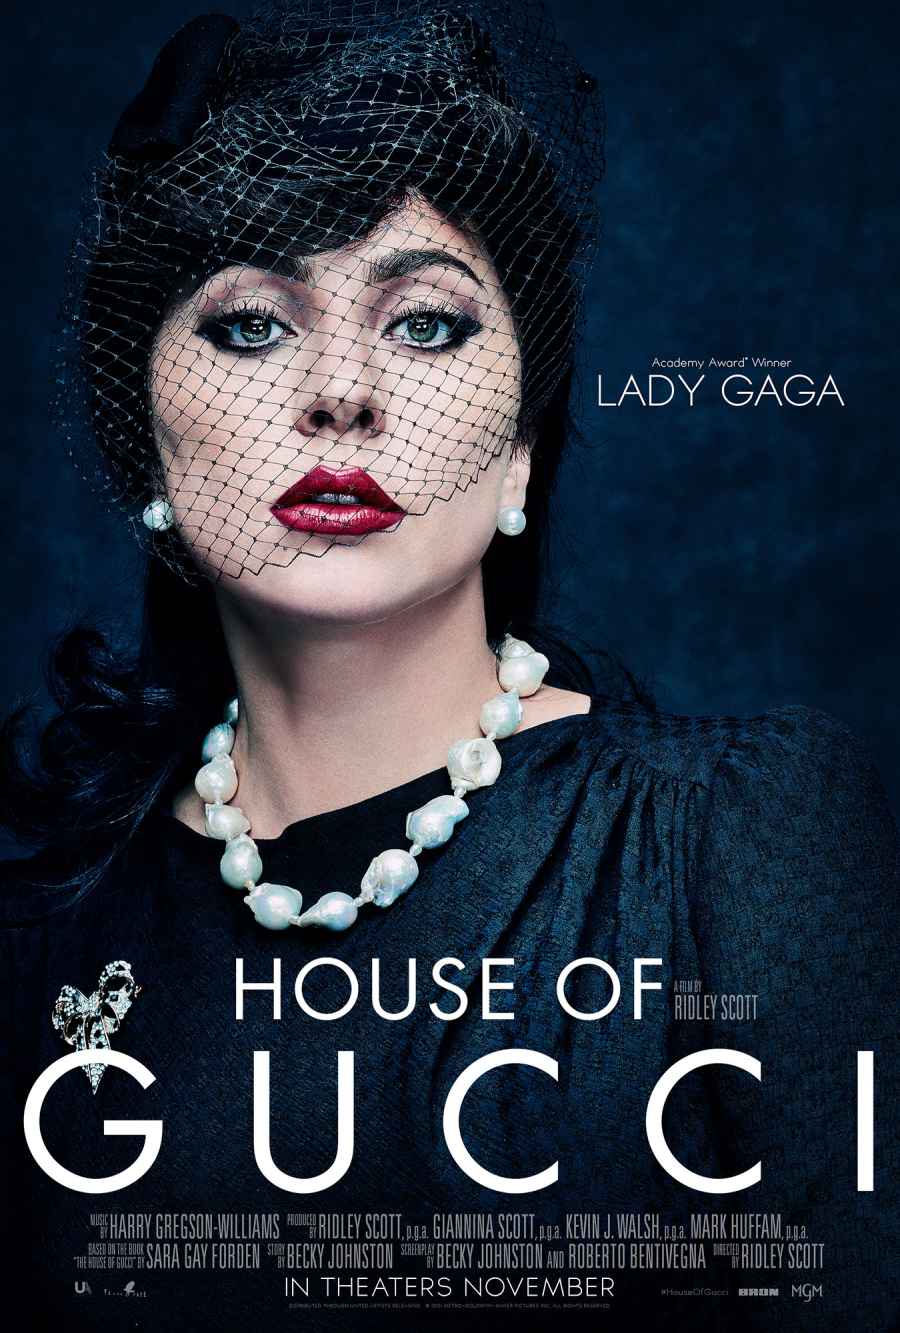 House of Gucci Character Poster Lady Gaga